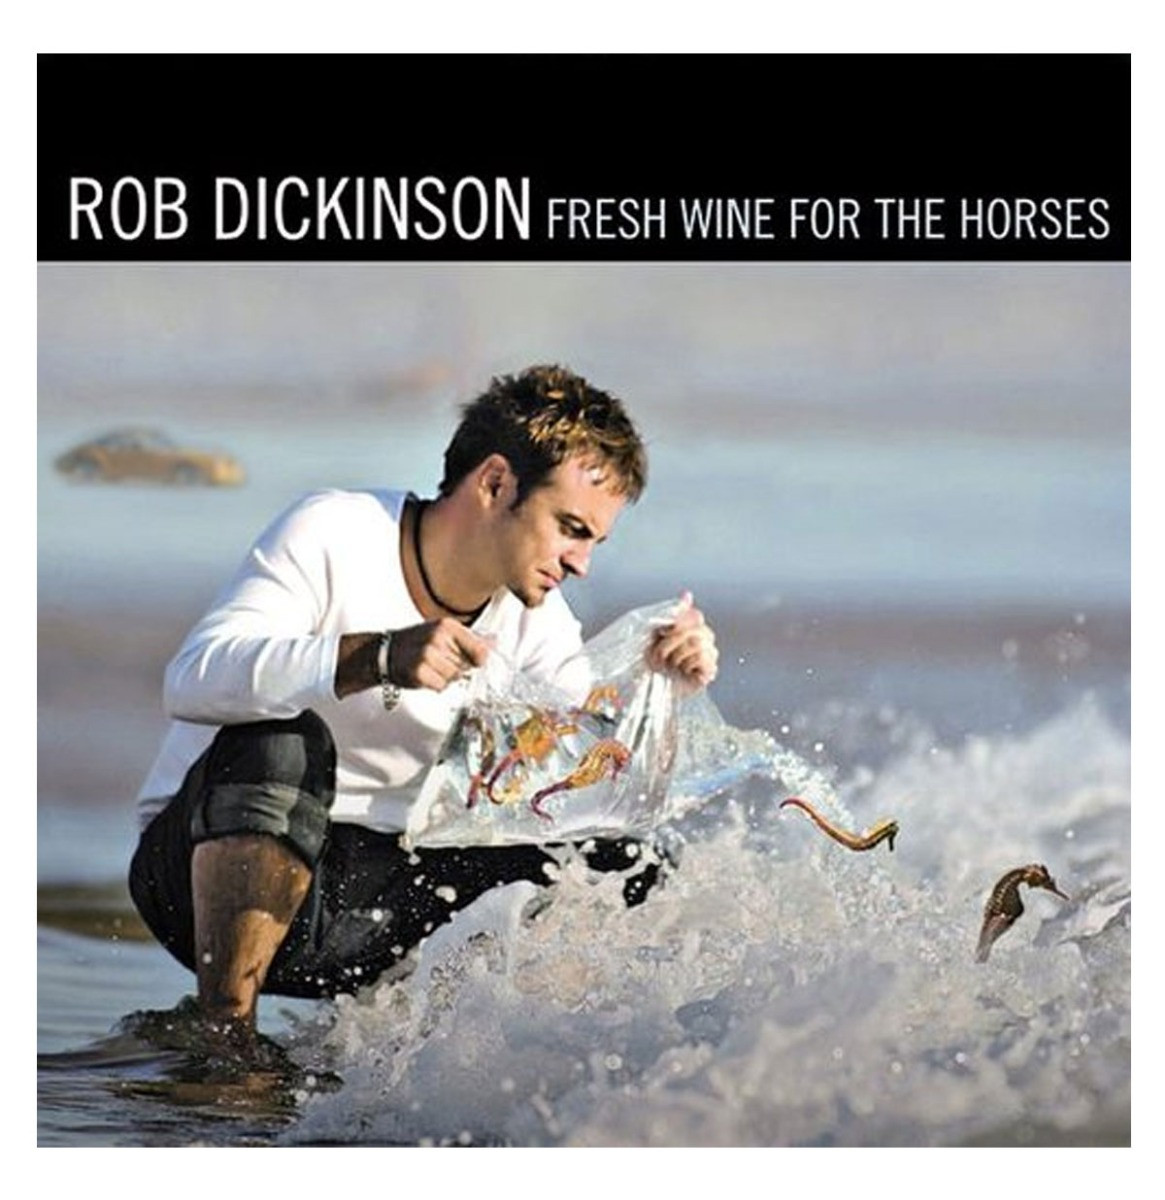 Rob Dickinson - Fresh Wine For The Horses (Expanded Version) 2-LP (Record Store Day Black Friday)